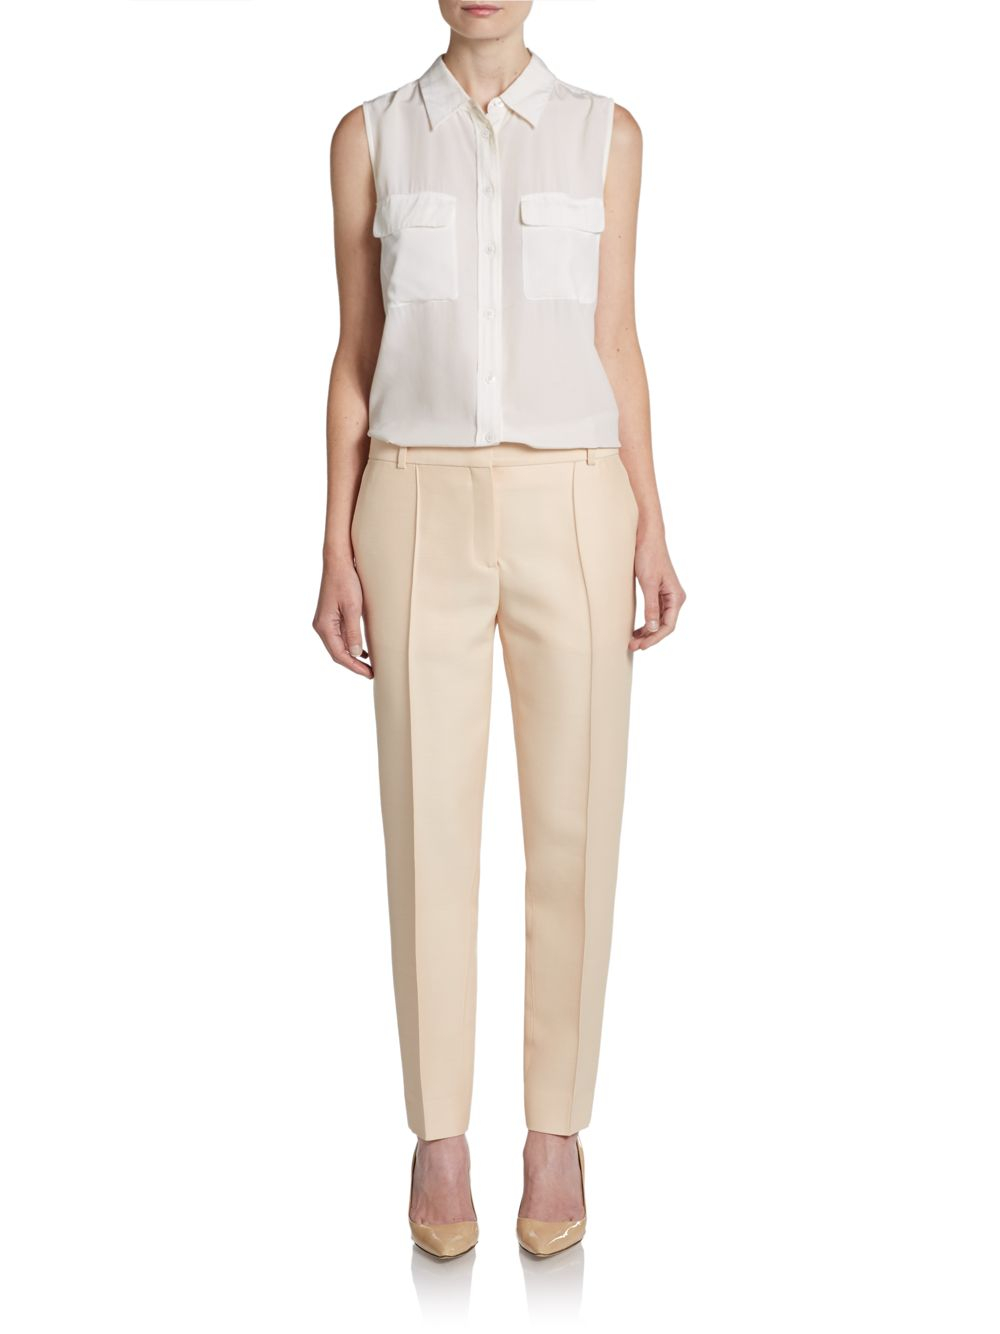 Lyst - Céline Iconic Wool Silk Tapered Pants in Natural